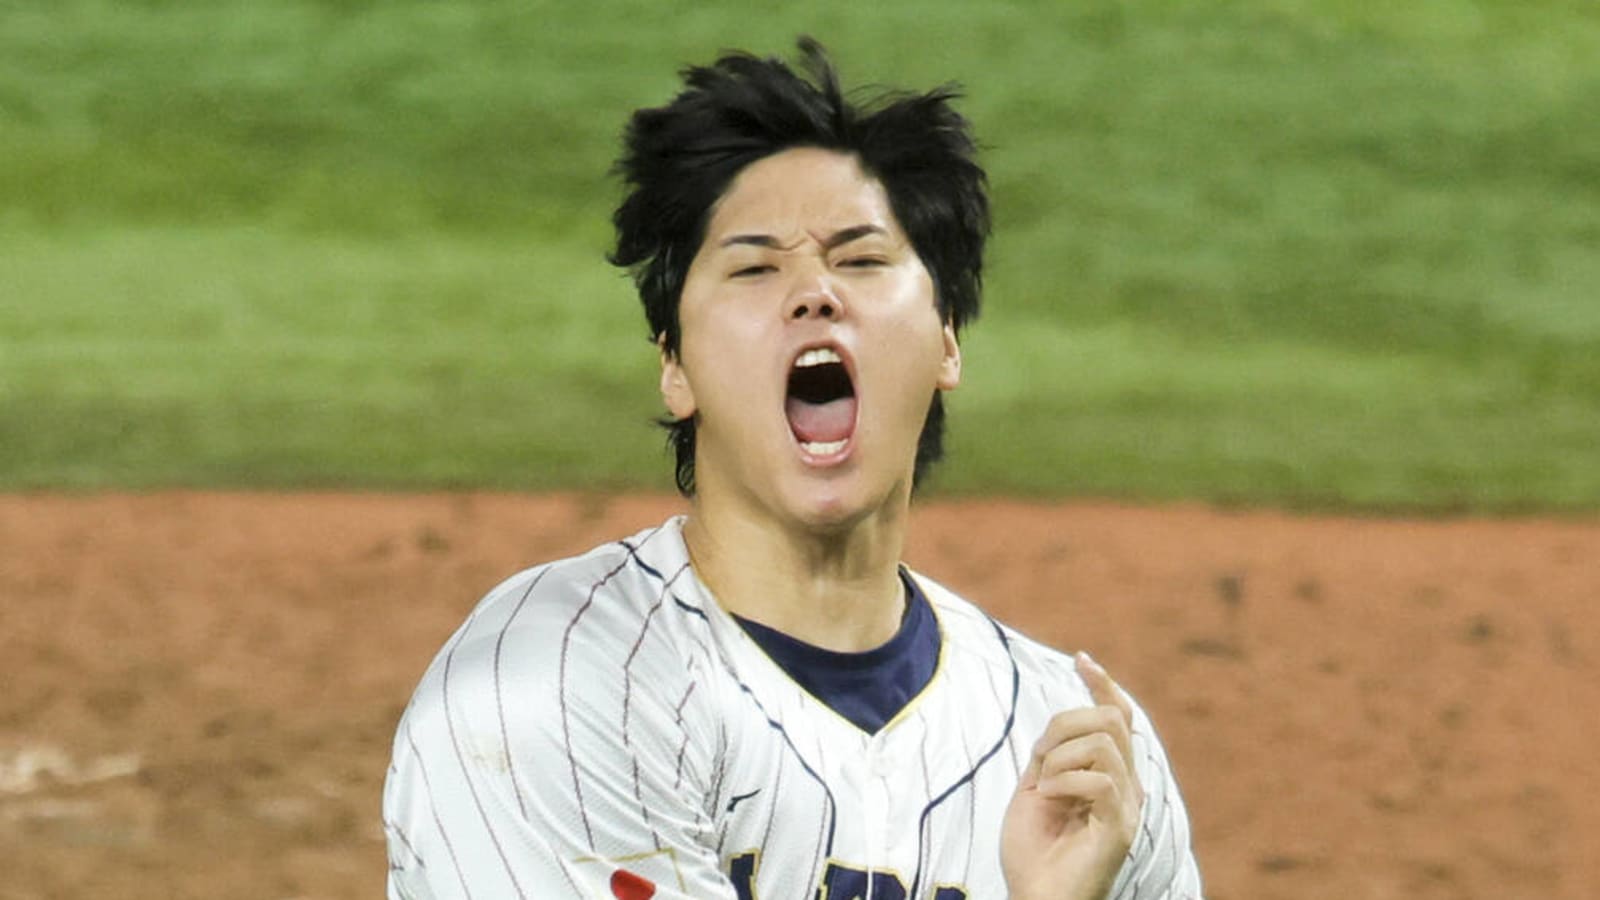 Radio host rips idea of Shohei Ohtani being greatest MLB player ever